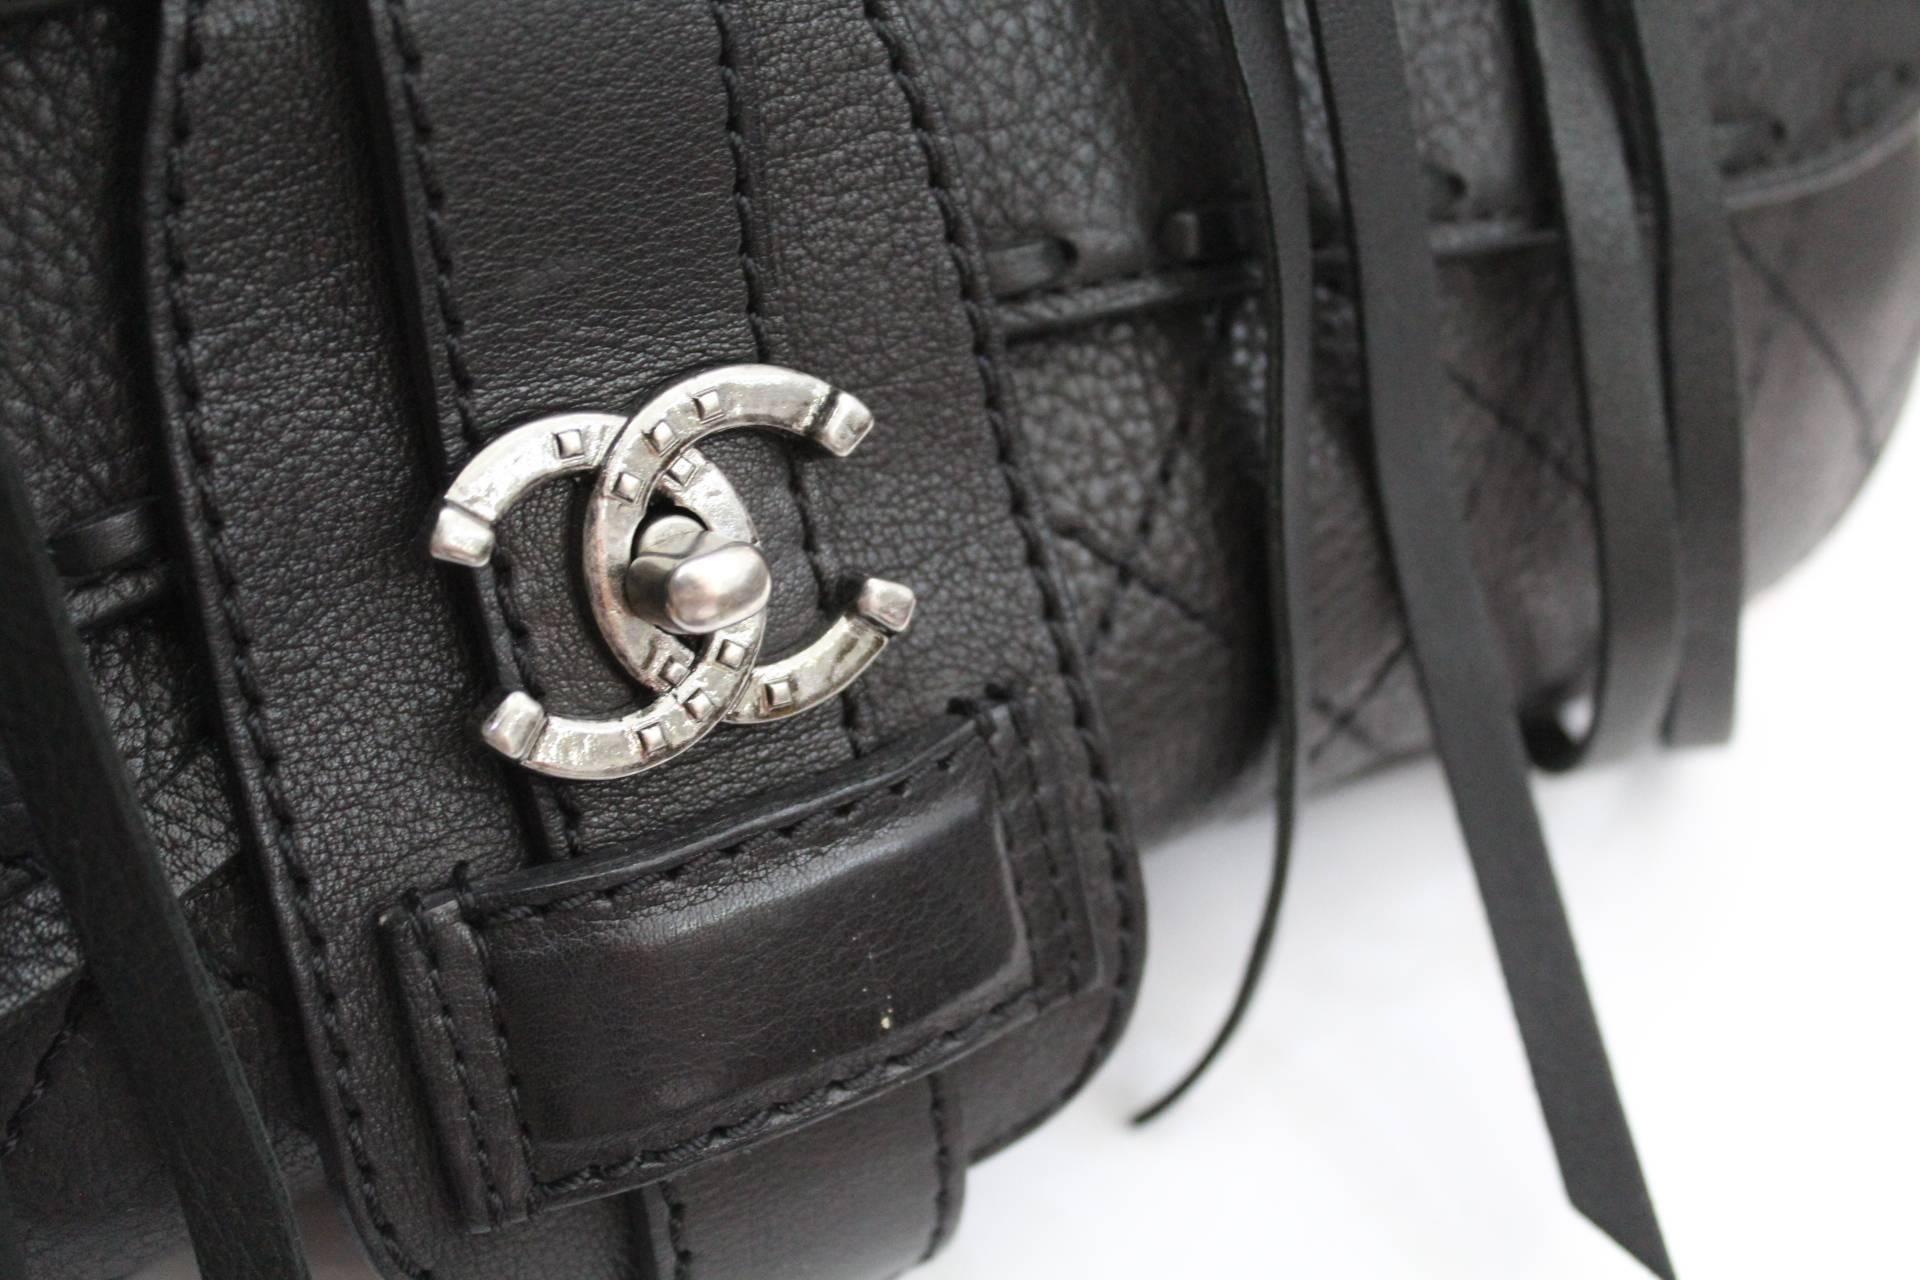 Chanel Dallas Saddle Ride My Bag Messenger Western 2014 Metiers D'Art Satchel Bag Purse. Ultra limited edition from the Chanel 2013 - 2014 Paris Dallas Metiers D'Art collection. Excellent gently used condition with light wear, light wear to interior